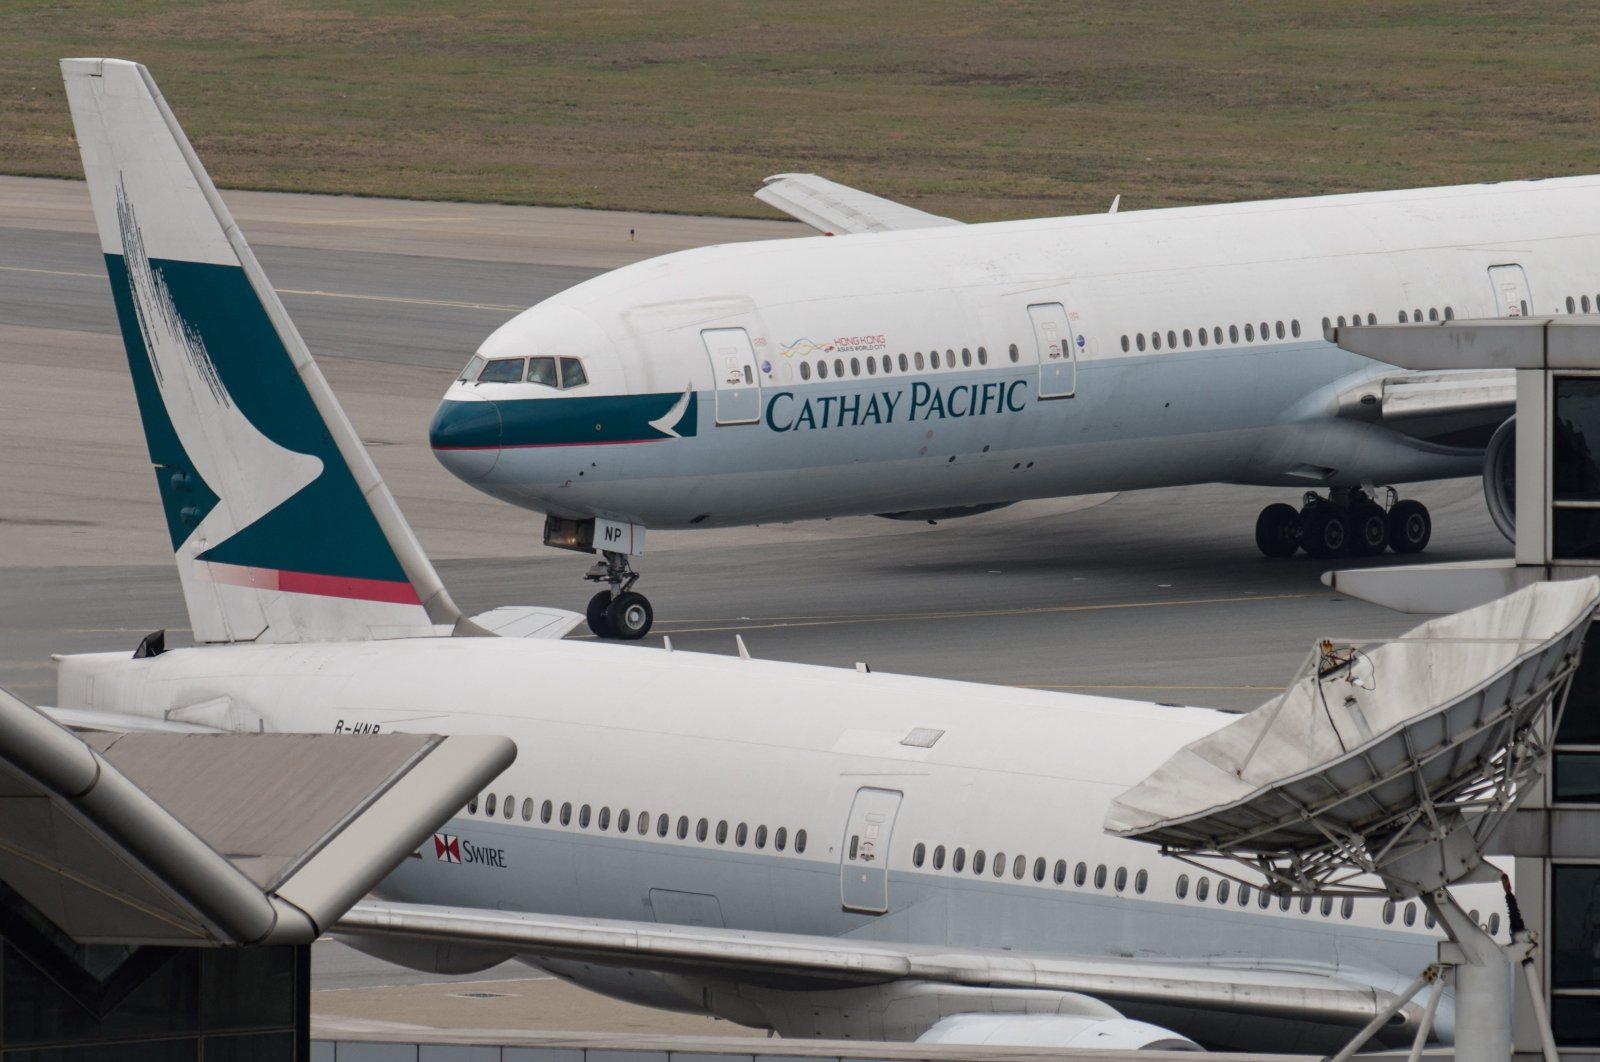 A Cathay Pacific Boeing 777 passenger aircraft (top) taxis past a stationary plane on the tarmac at the international airport in Hong Kong, China, March 15, 2017. (AFP File Photo)